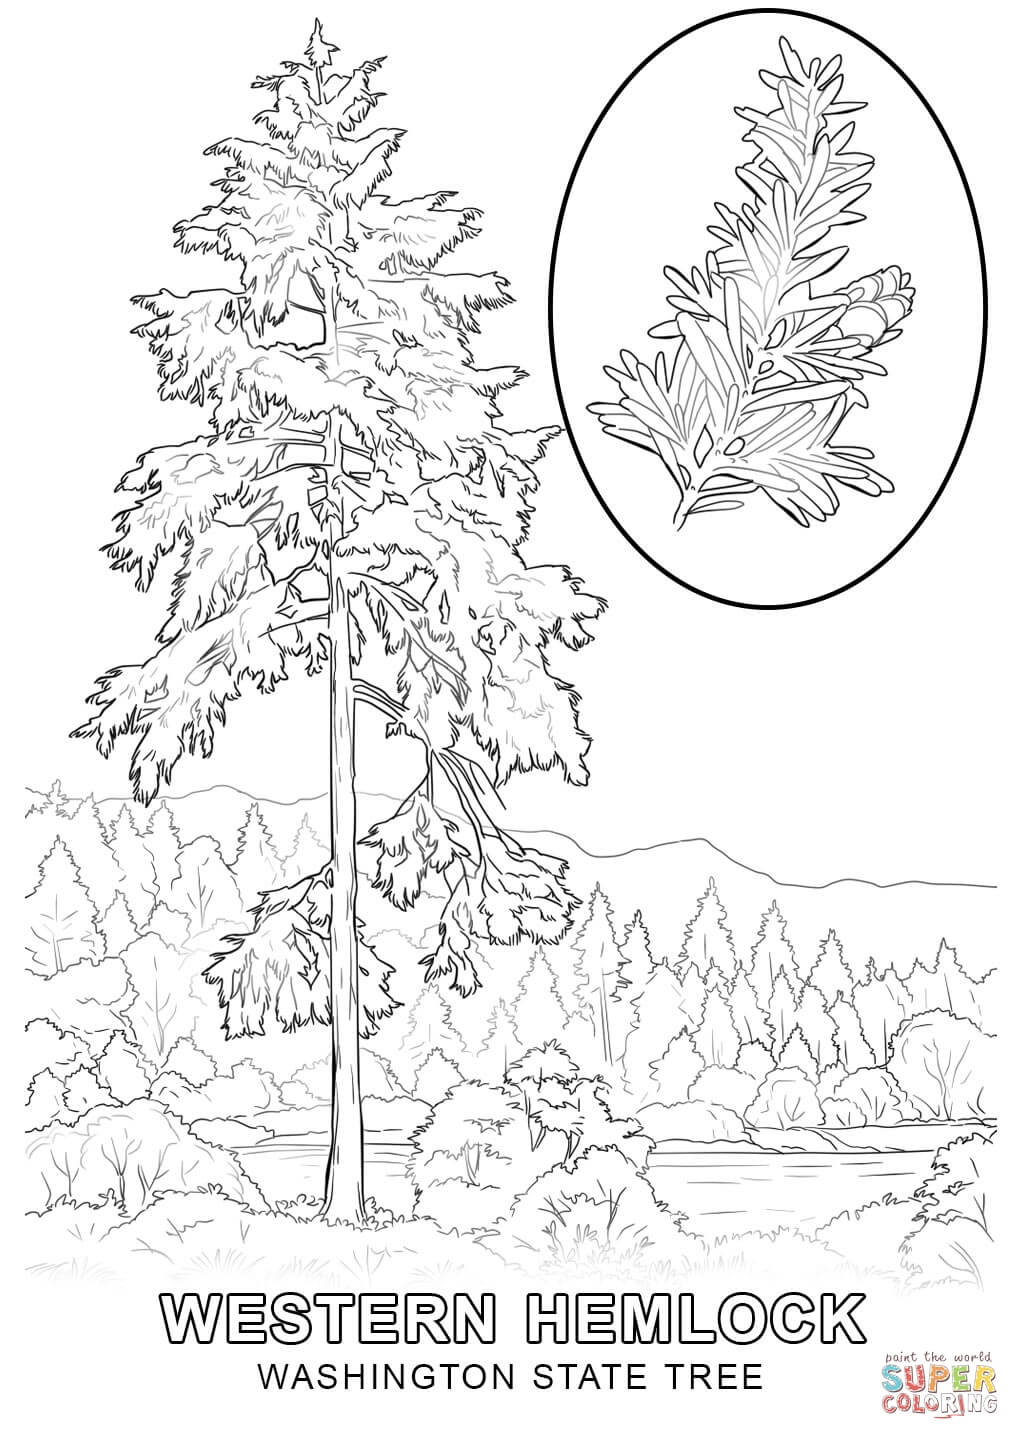 Washington State Tree coloring page | Free Printable Coloring Pages